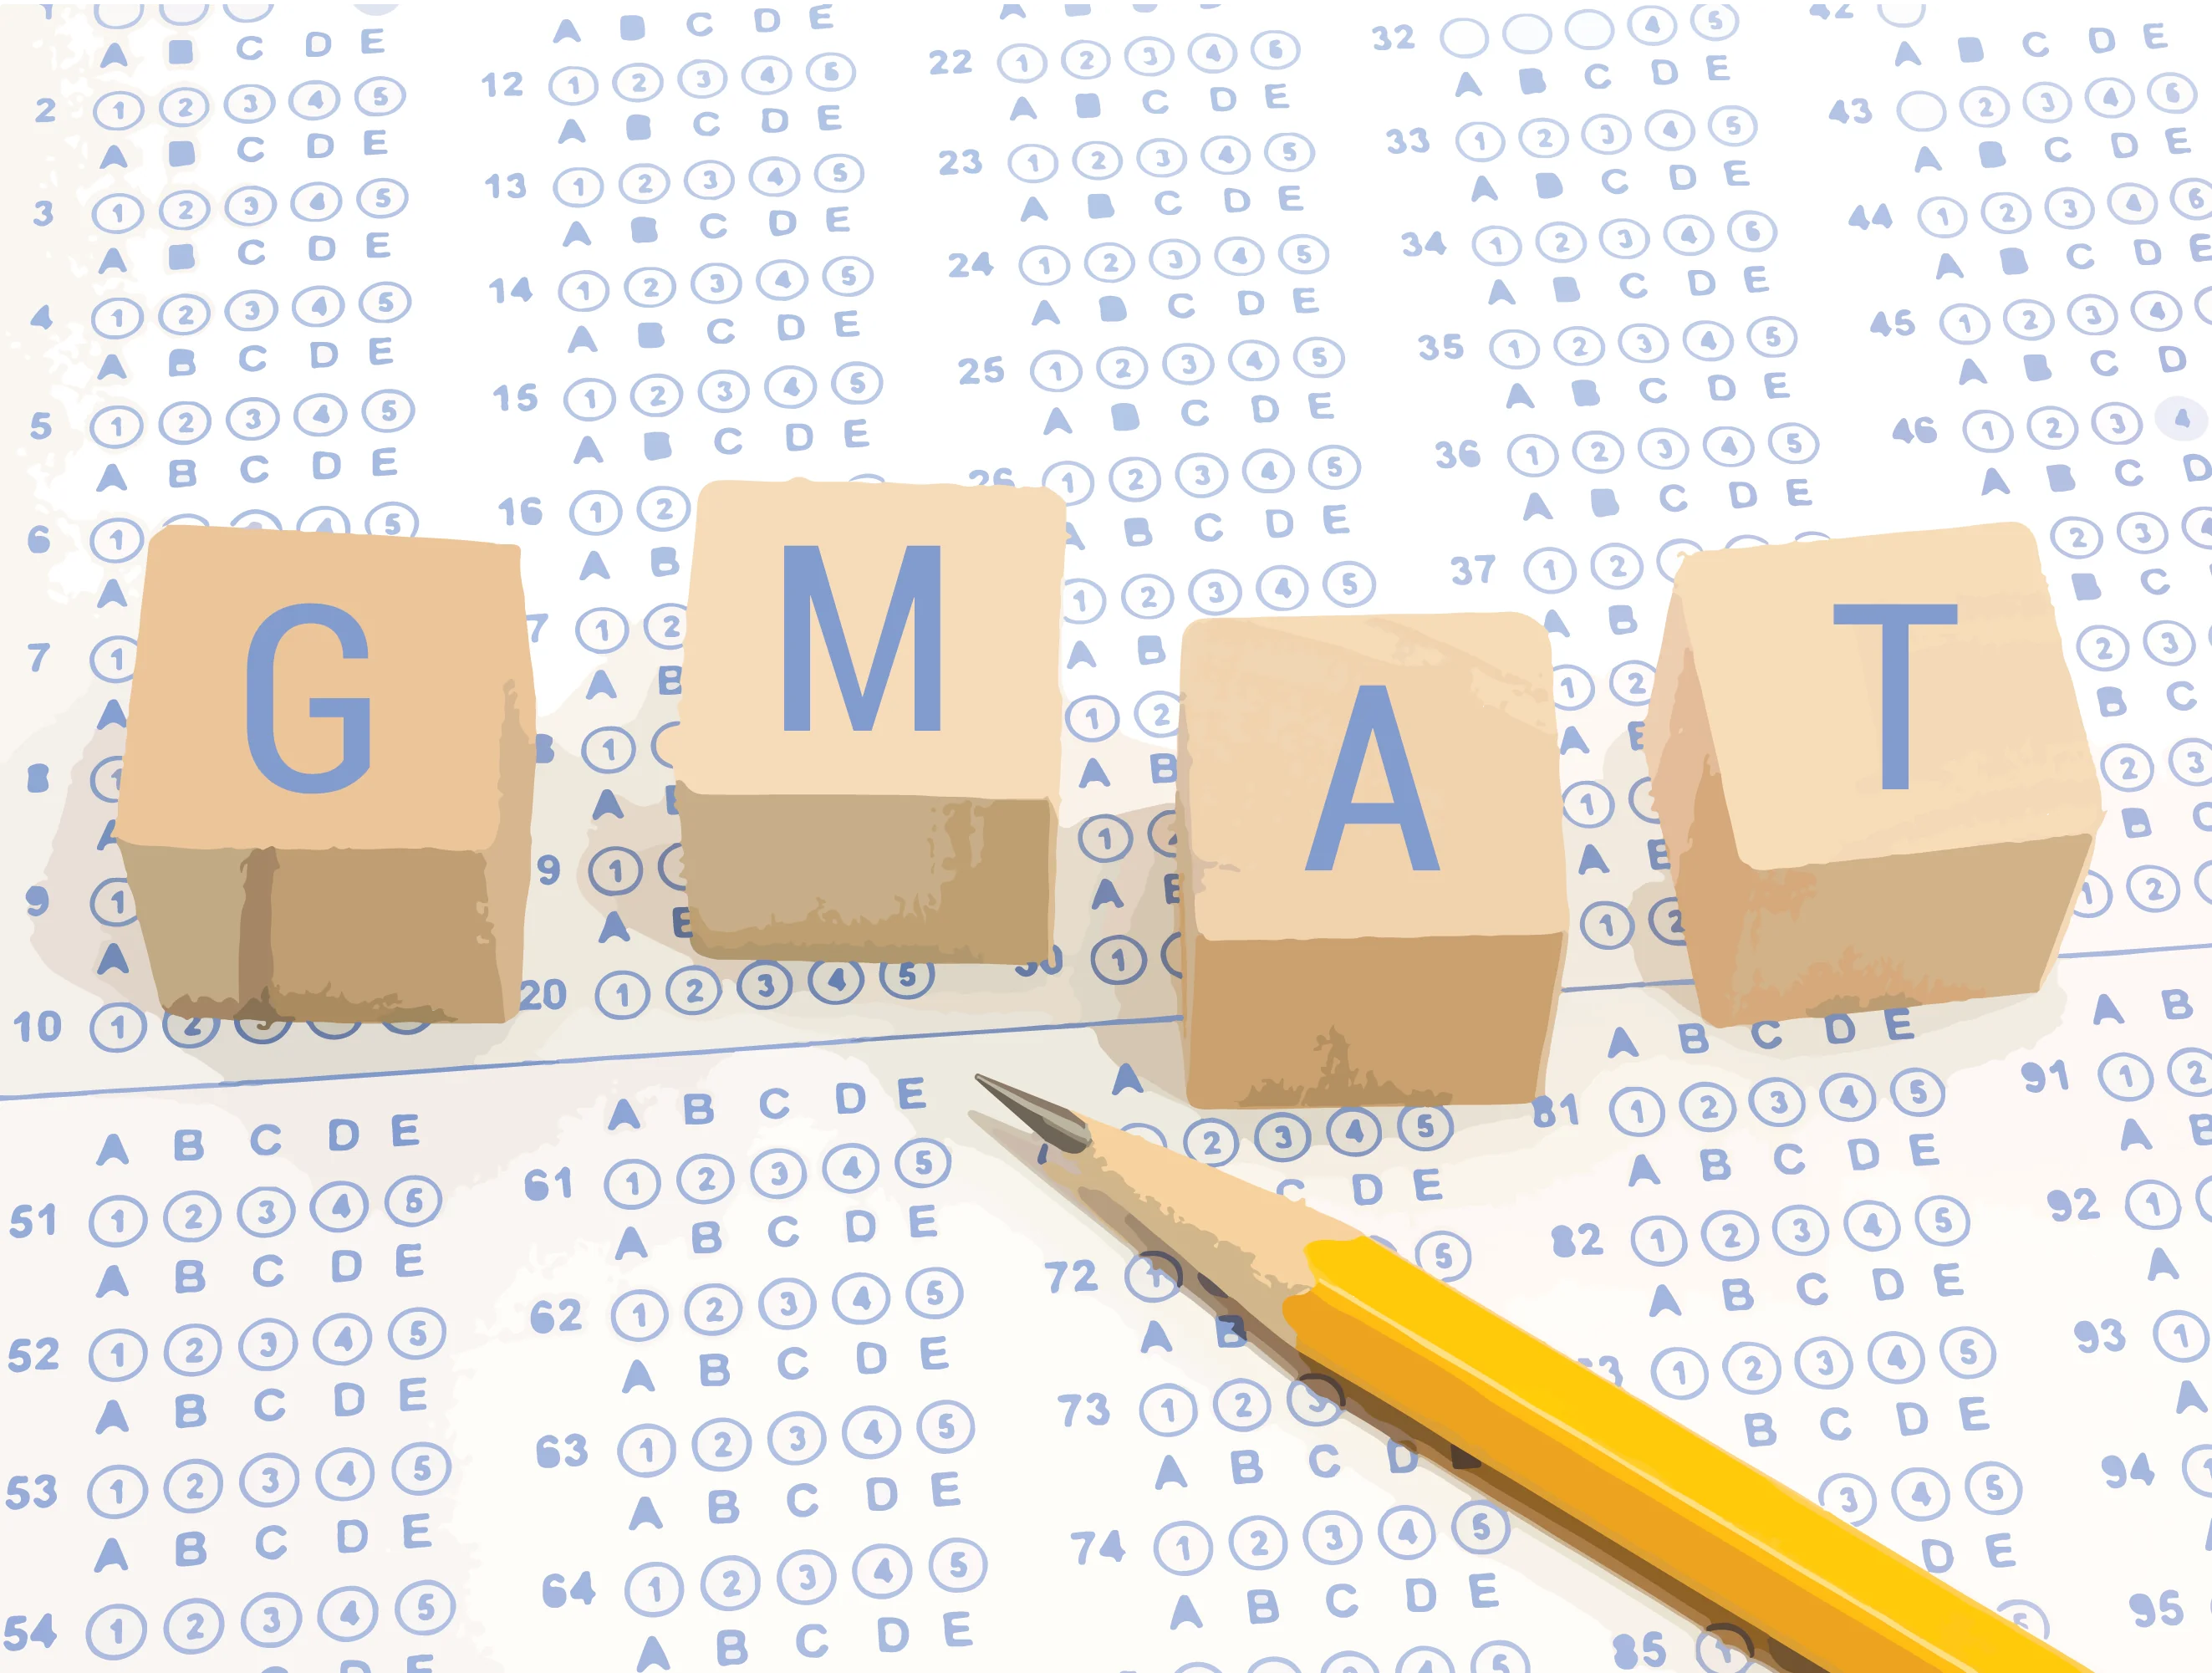 Poets&Quants  Insider Tips & Tricks For The GMAT